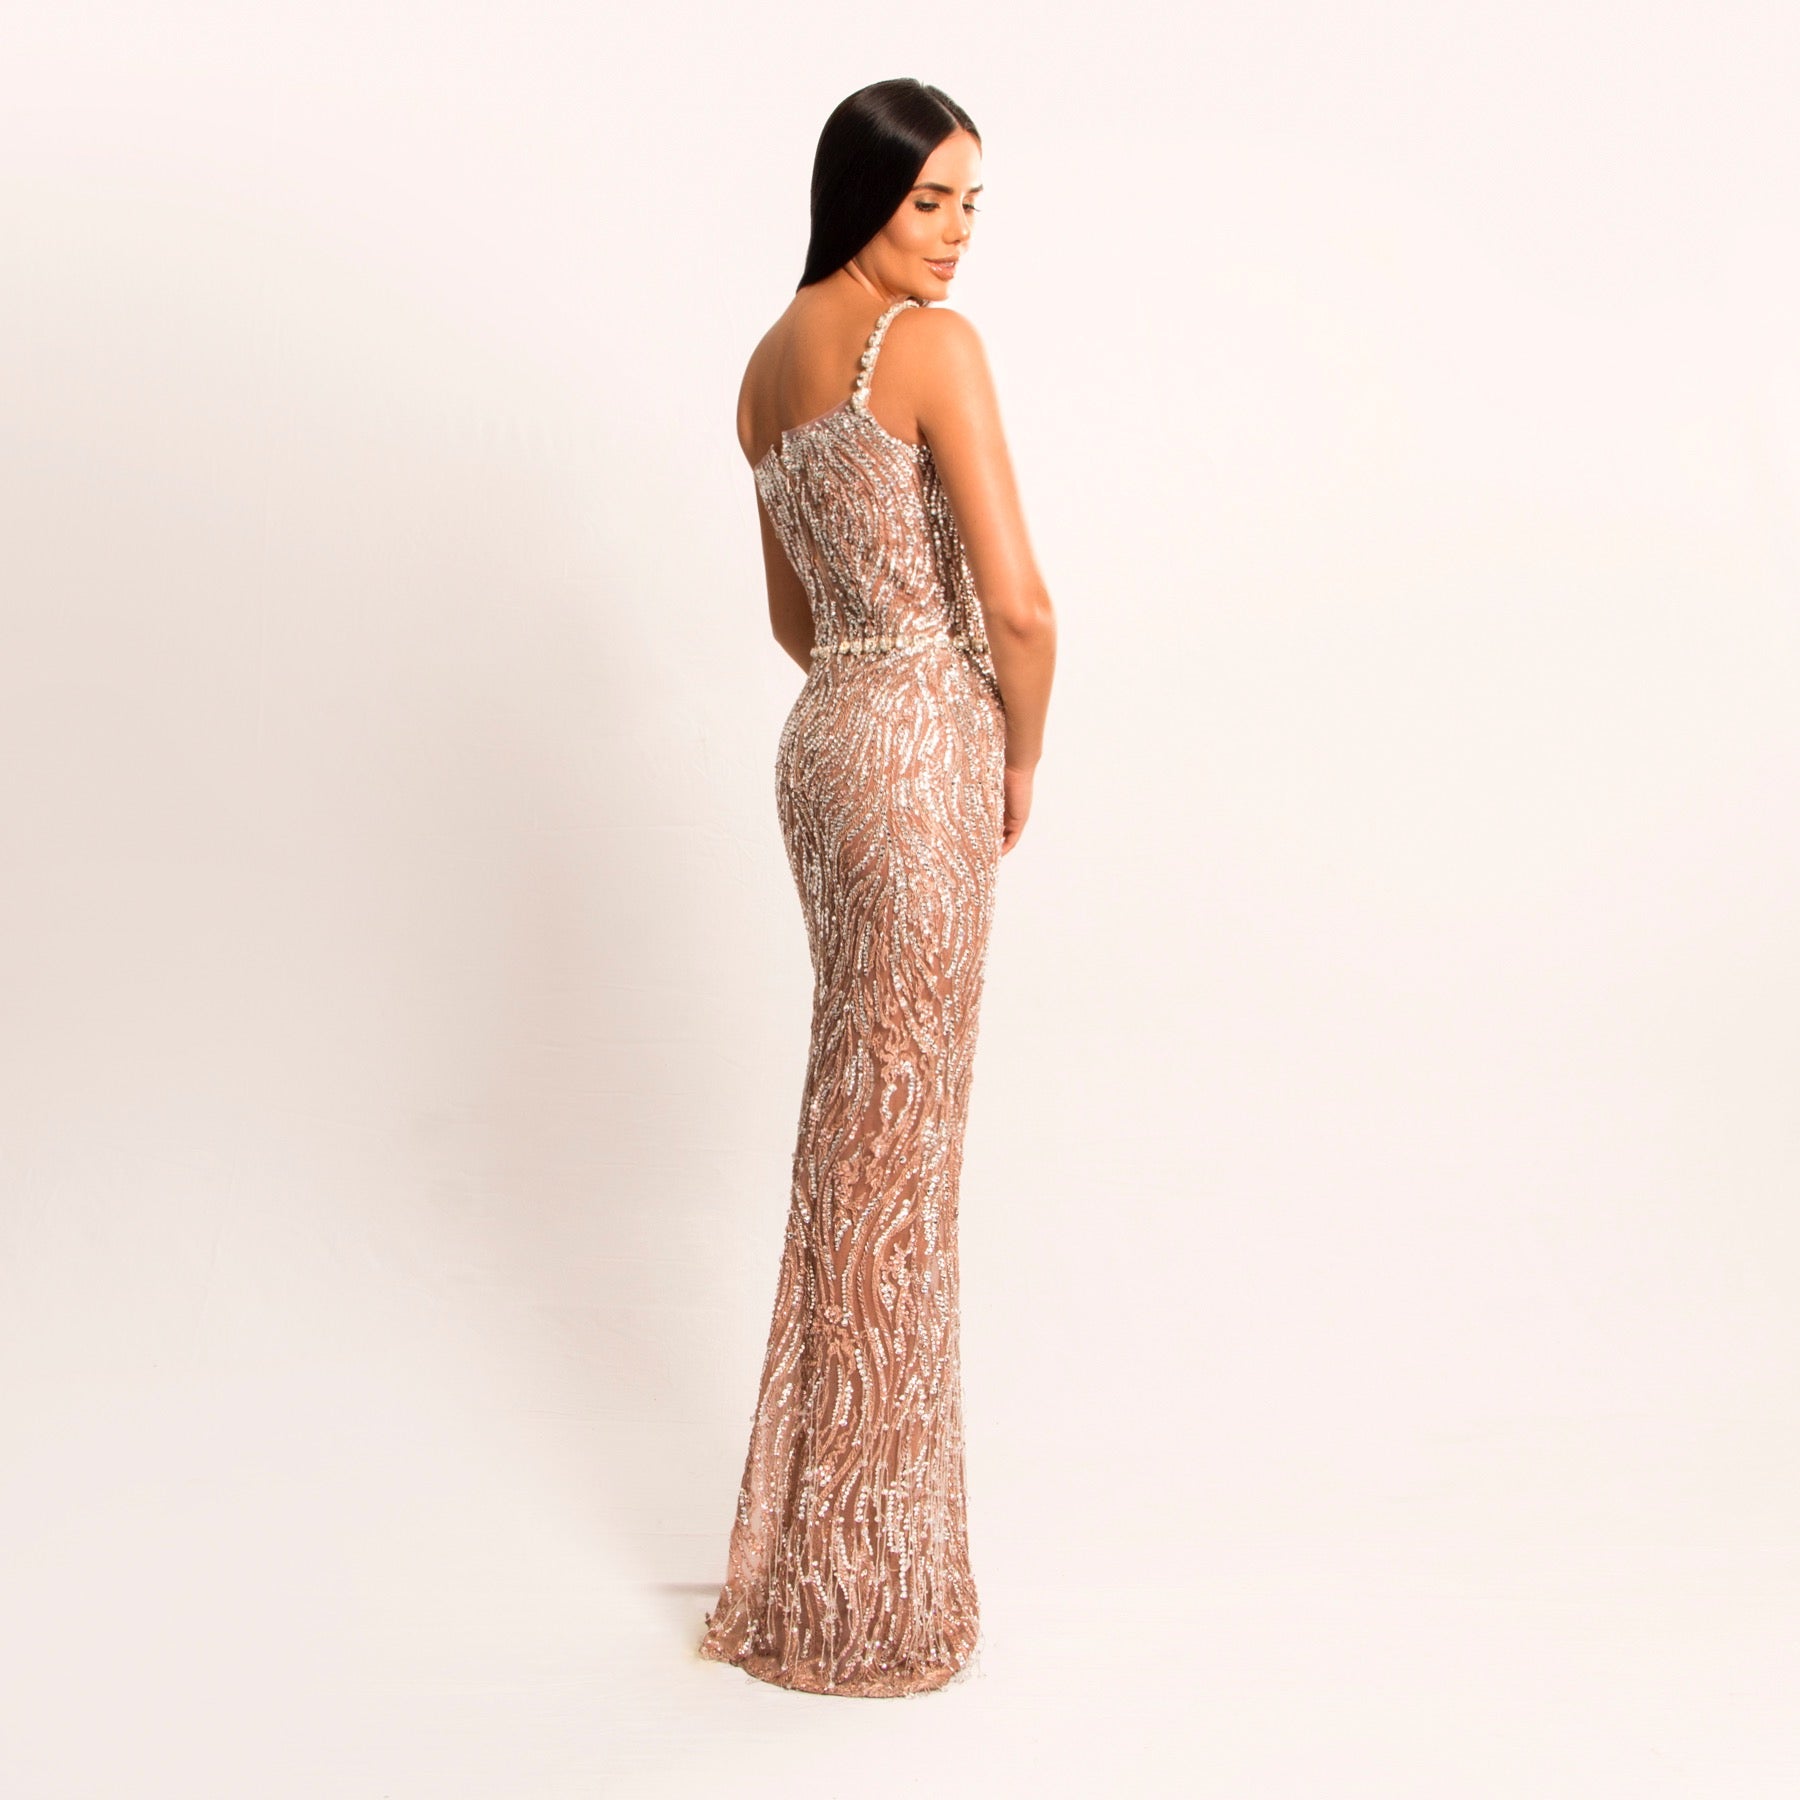 Nude Color Dress with Silver Embroidery